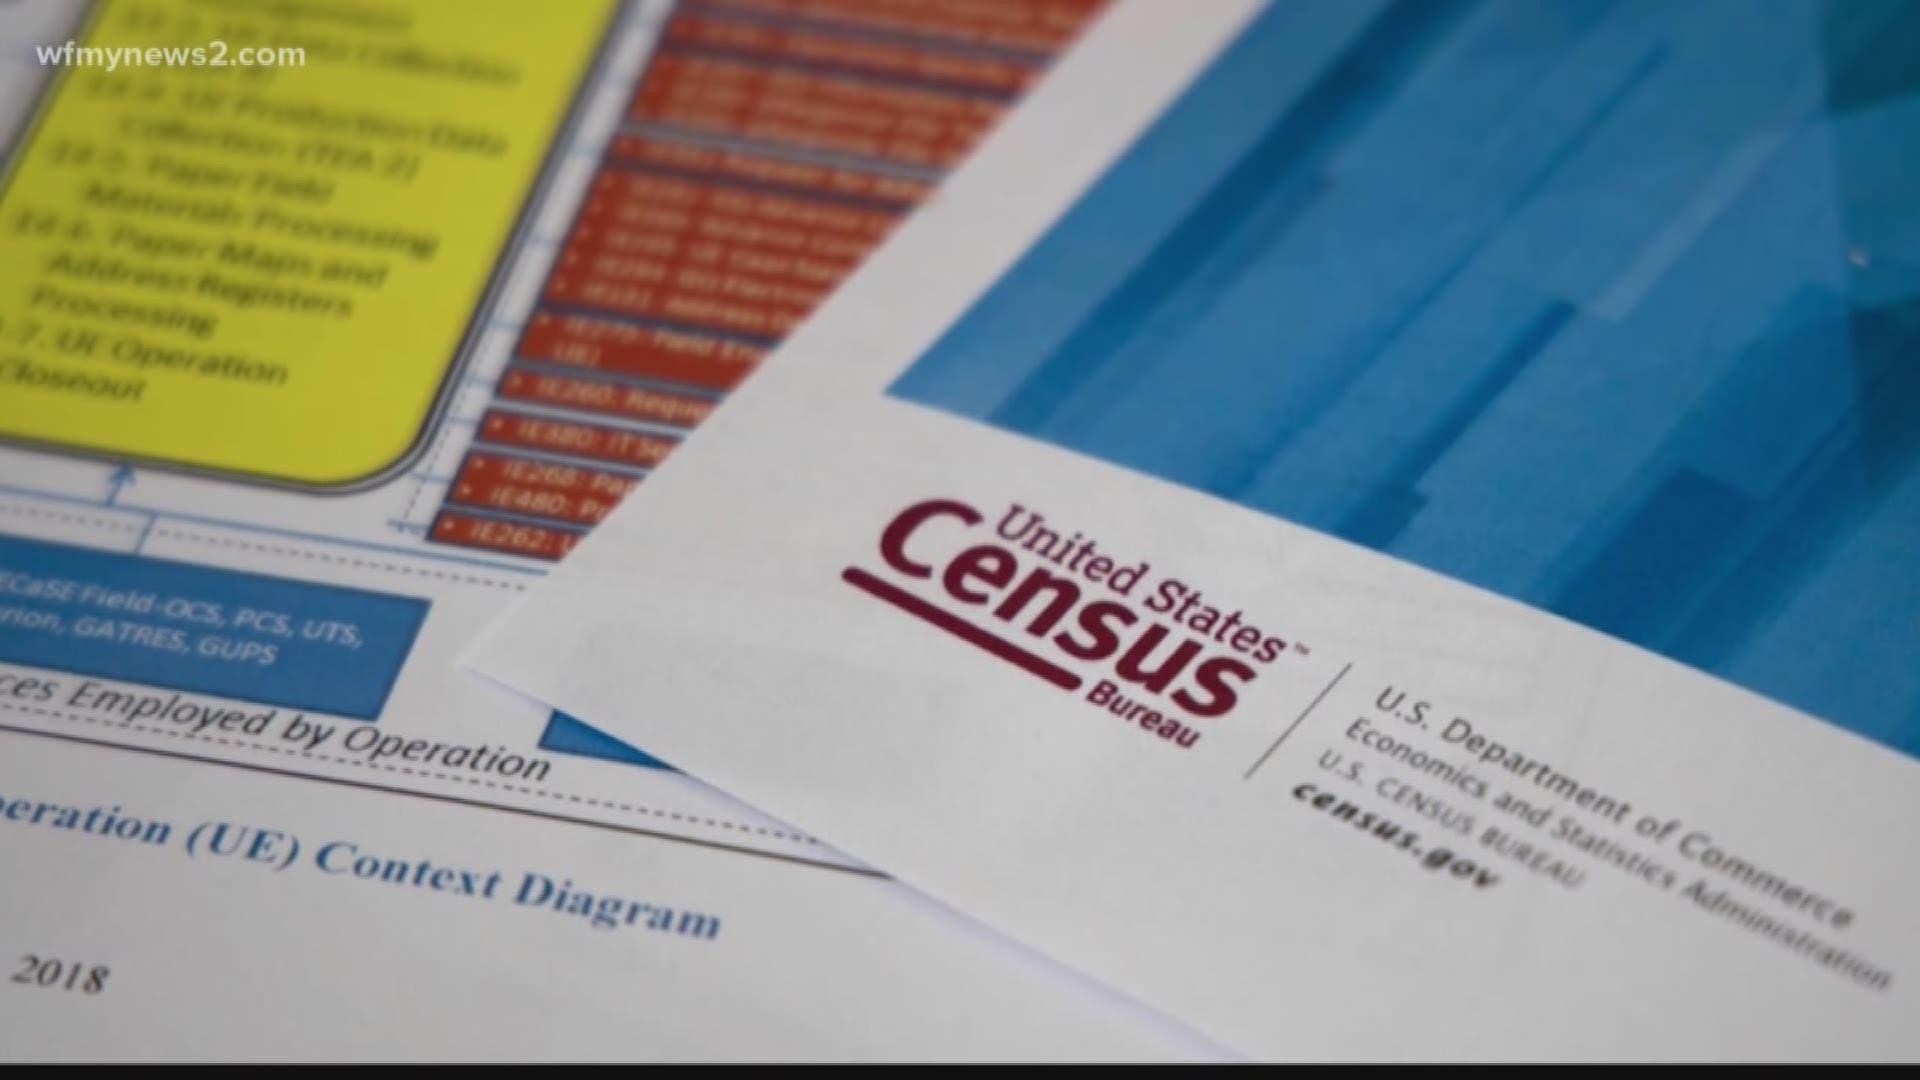 The new census question has sparked concerns. But you need to know the law first.